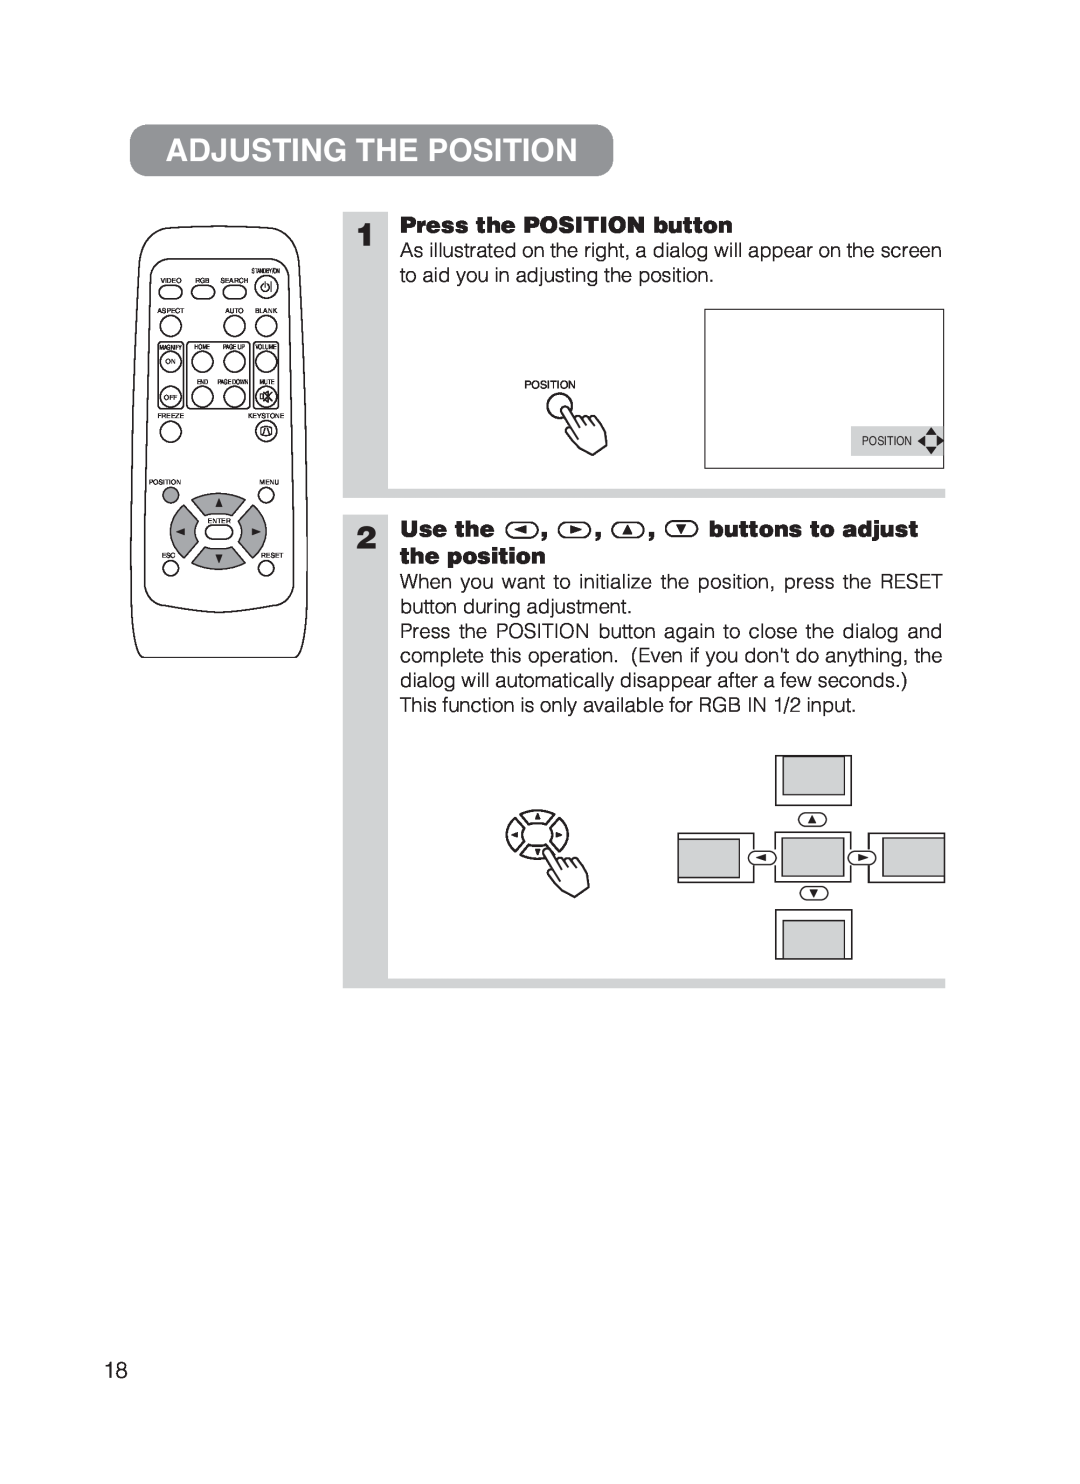 Dukane 8755B user manual Adjusting The Position, Press the POSITION button, Use the, buttons to adjust, the position 